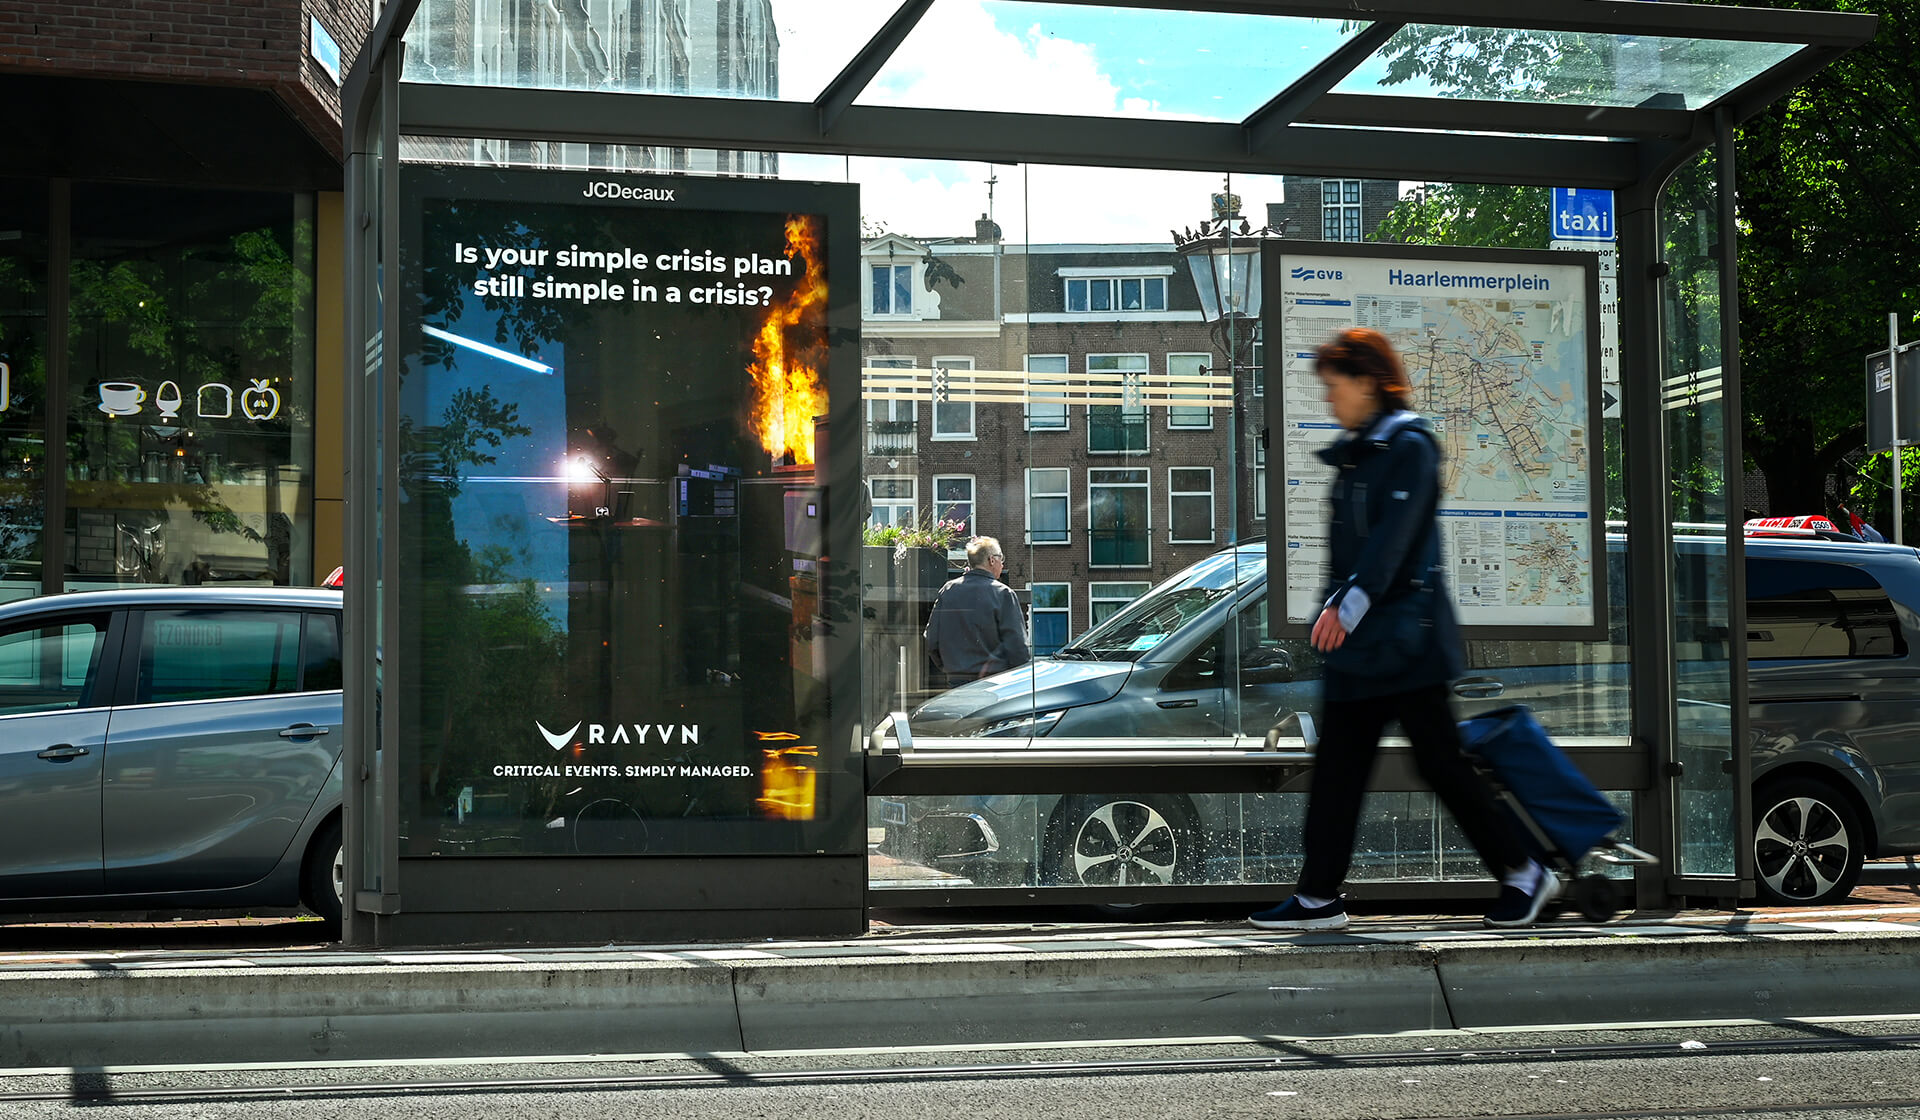 Rayvn Crisis Management - Ad Campaign - Mellor&Smith - OOH billboard Amsterdam